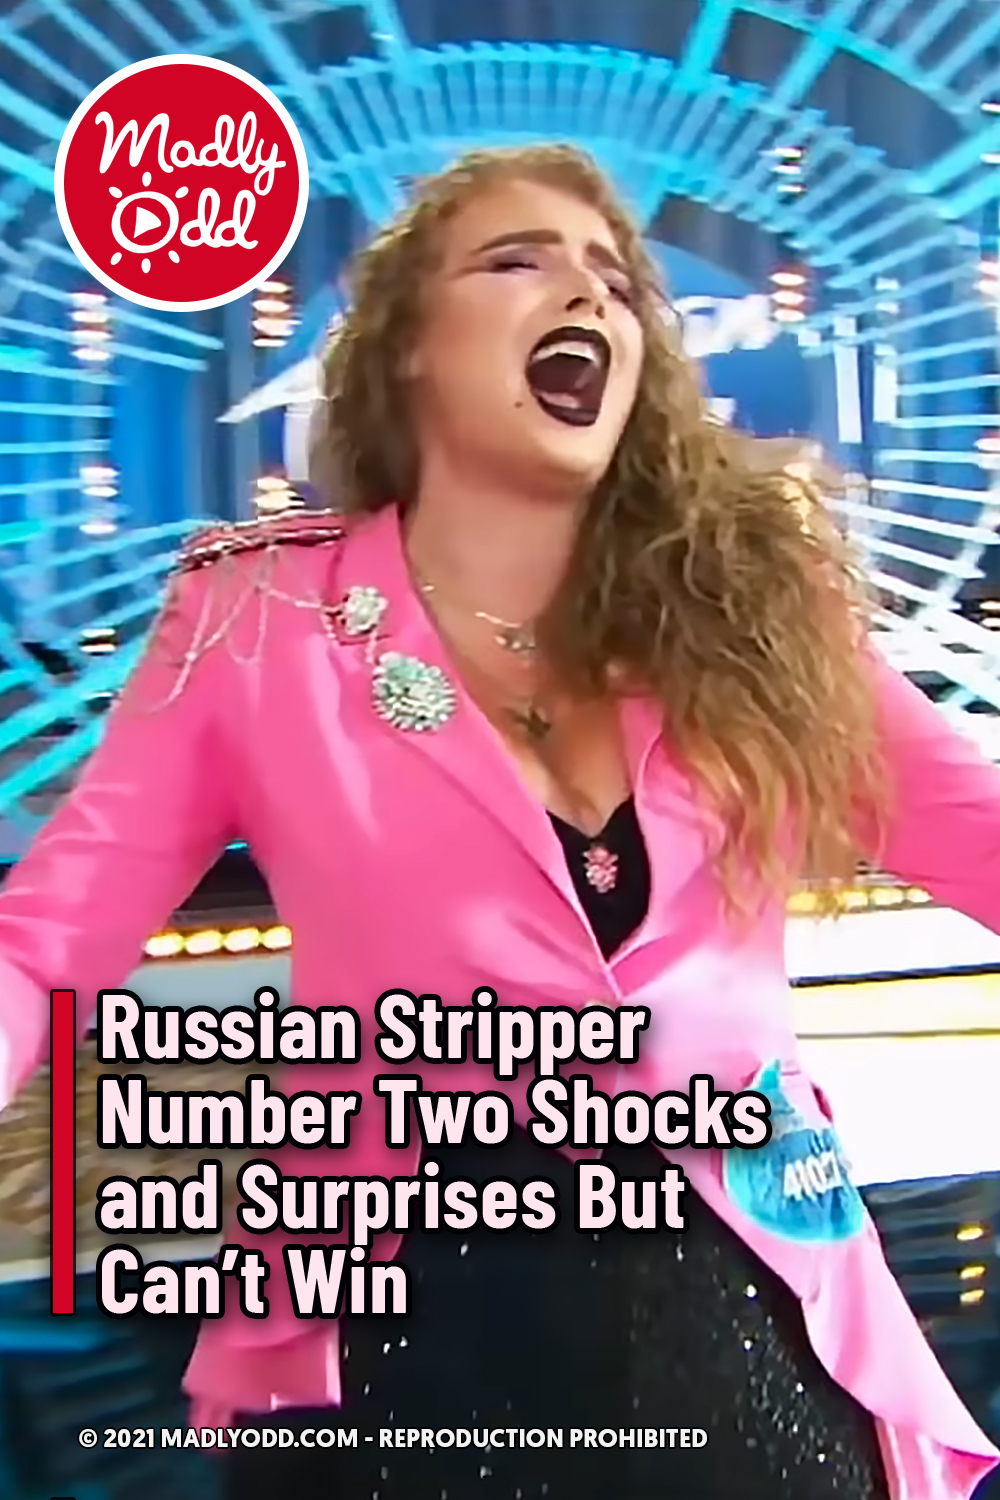 Russian Stripper Number Two Shocks and Surprises But Can’t Win